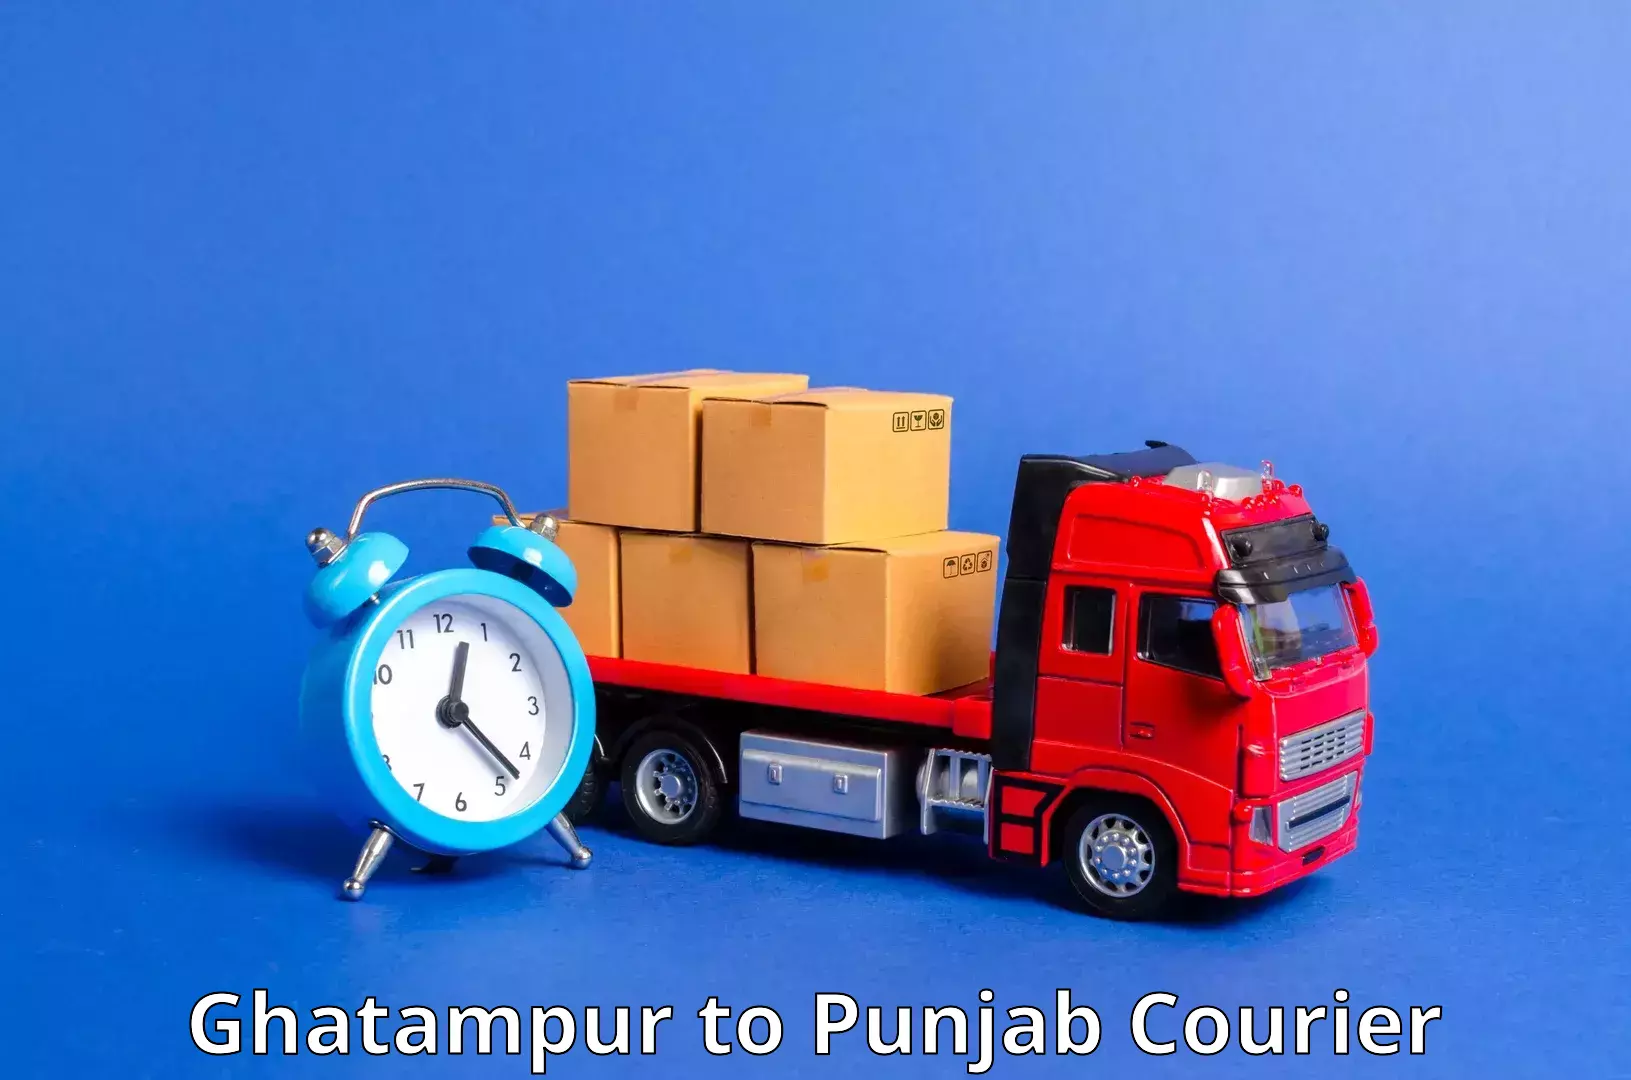 Professional parcel services in Ghatampur to Goindwal Sahib